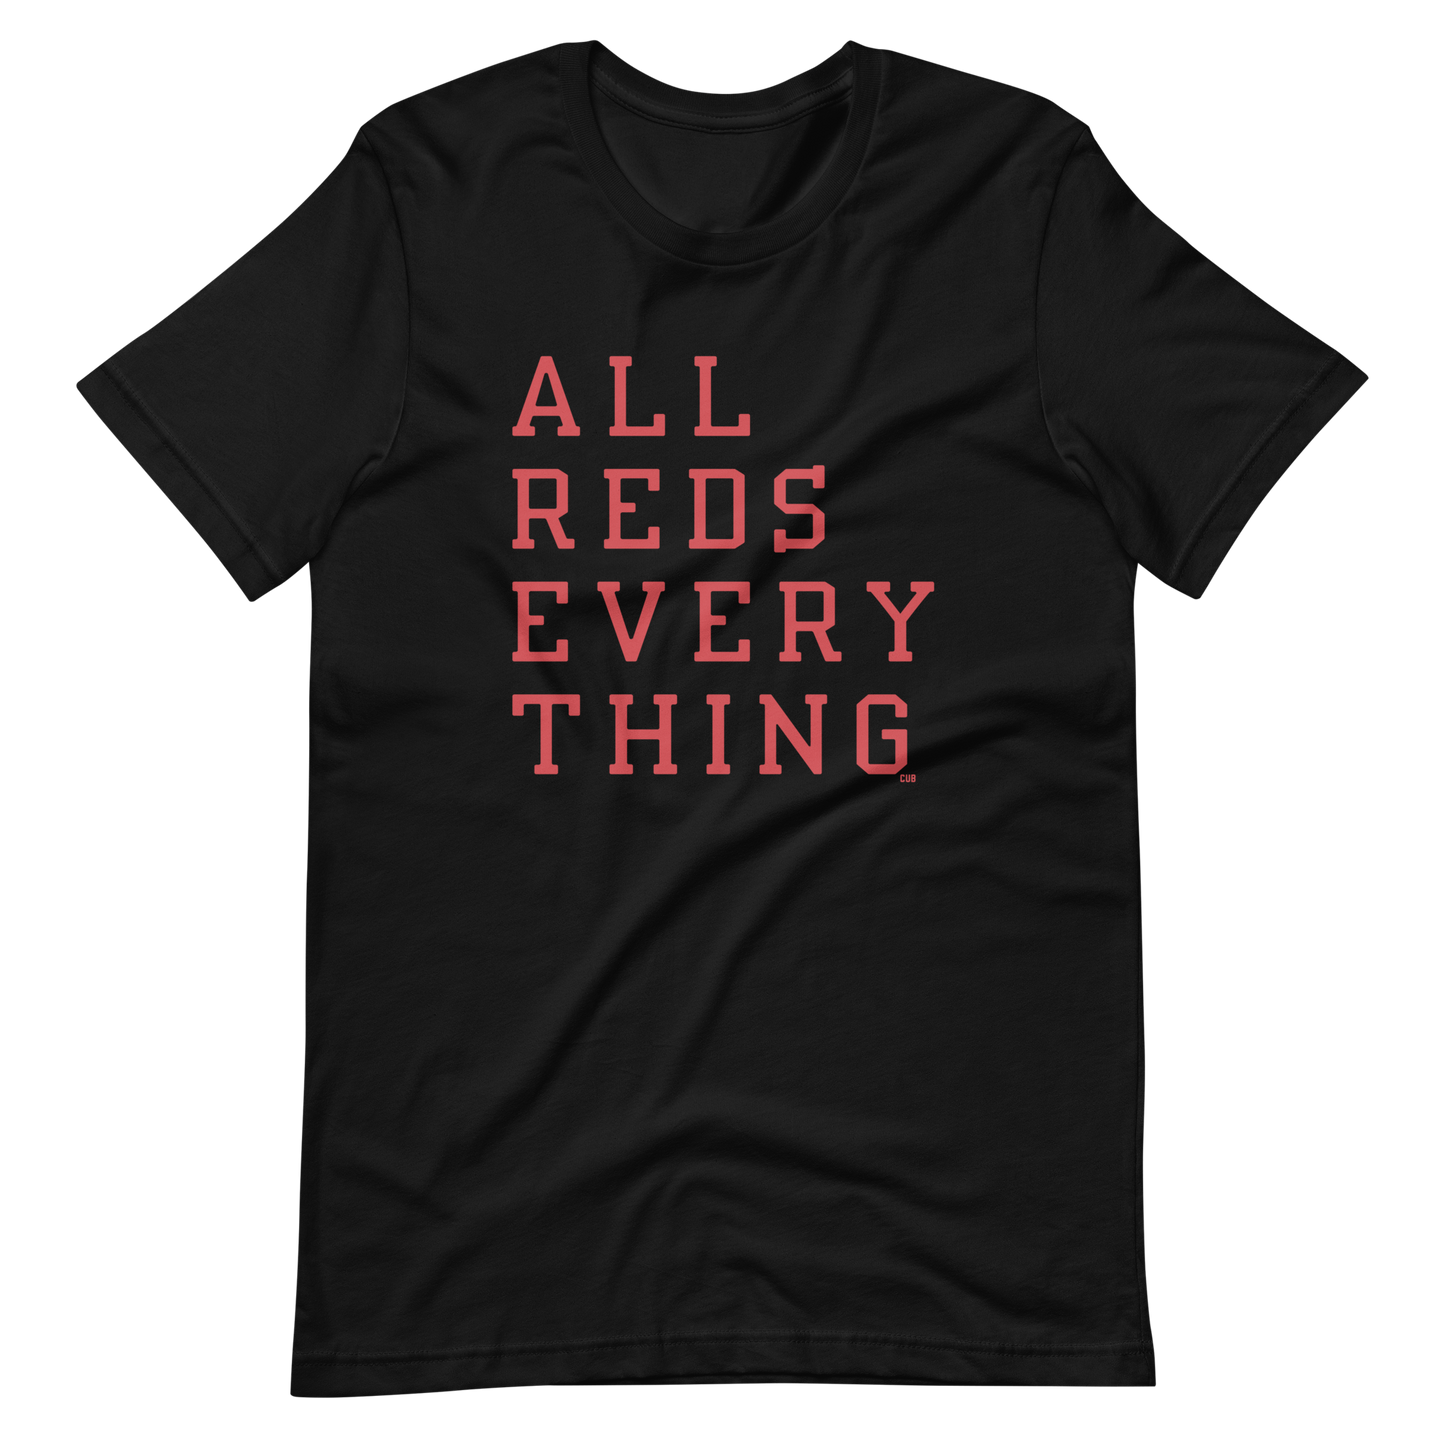 All Reds Everything T-Shirt